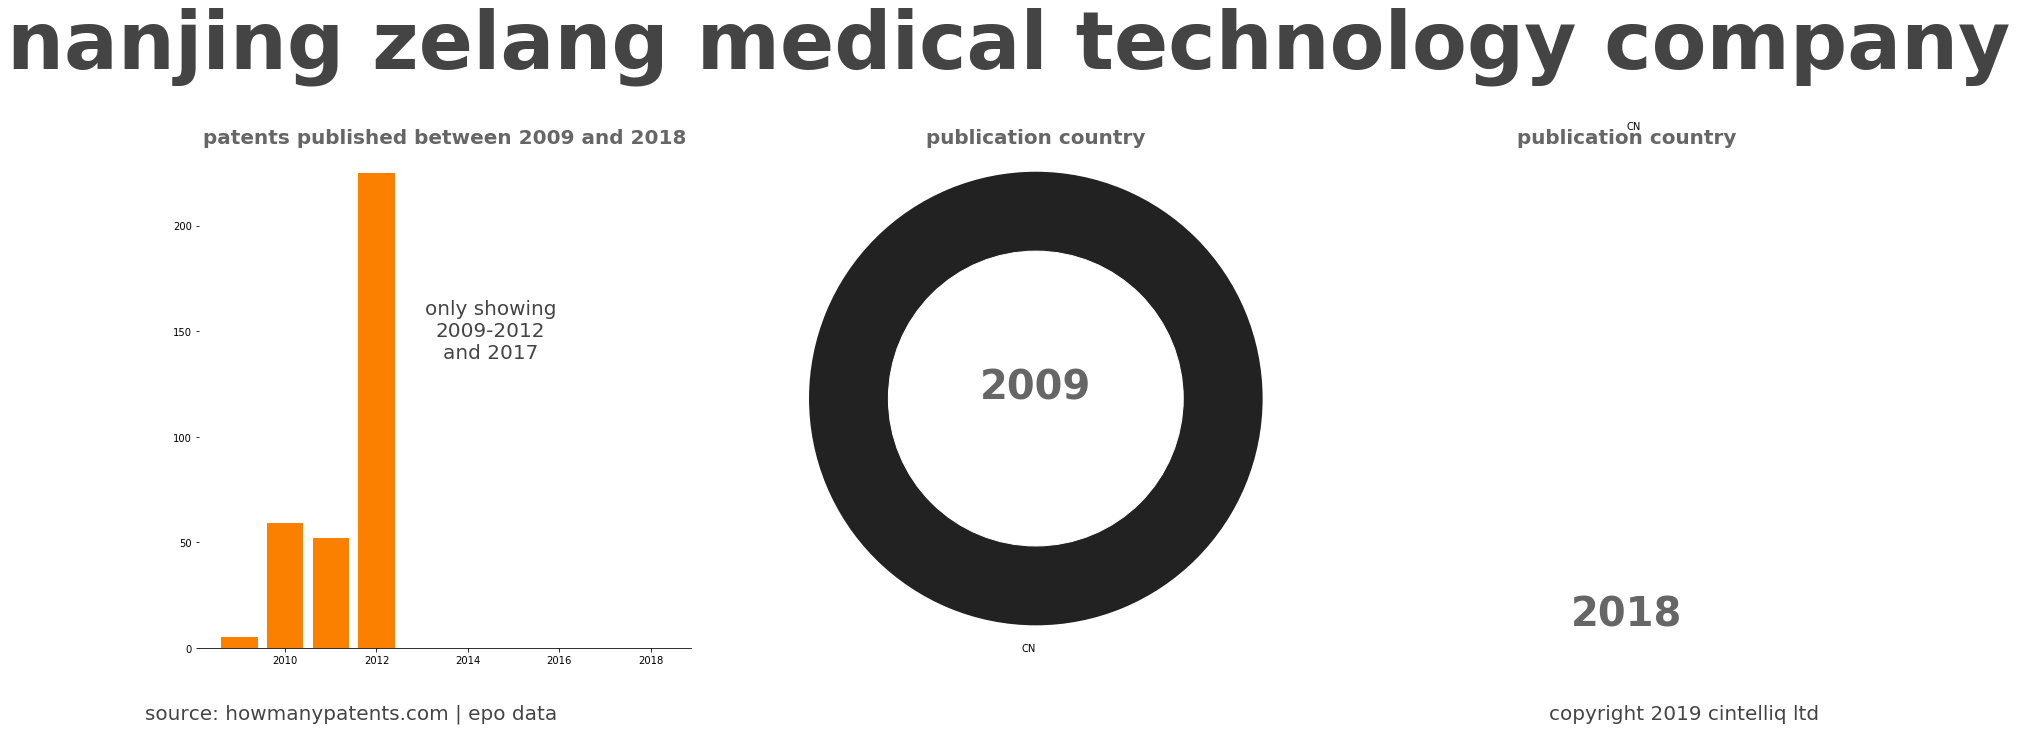 summary of patents for Nanjing Zelang Medical Technology Company